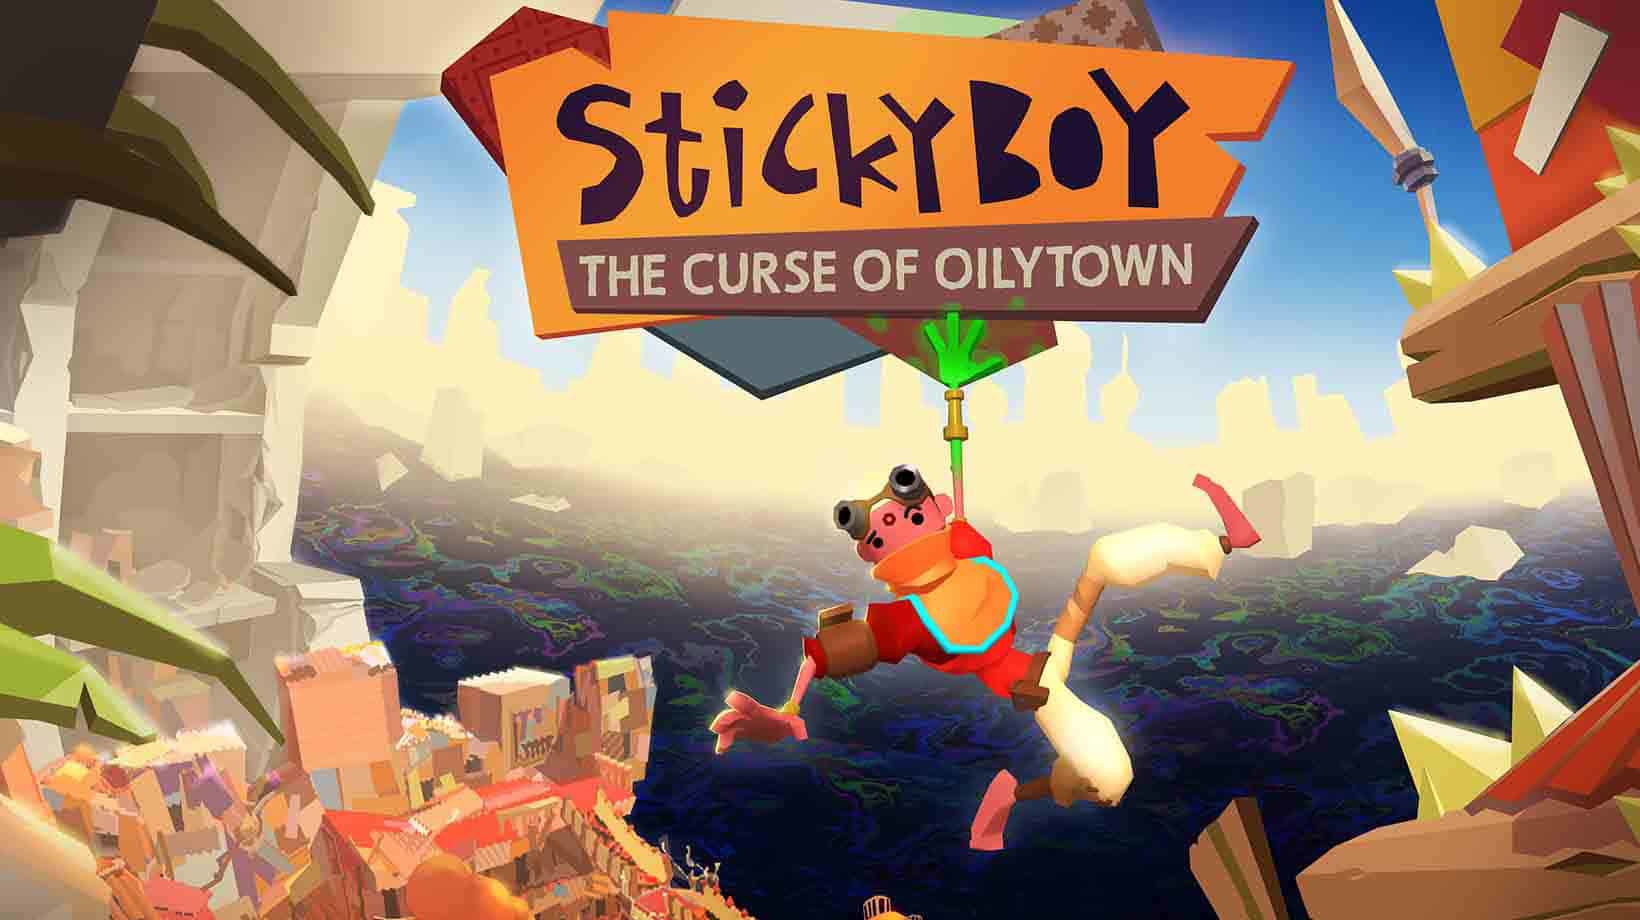 Sticky boy, the curse of oily town